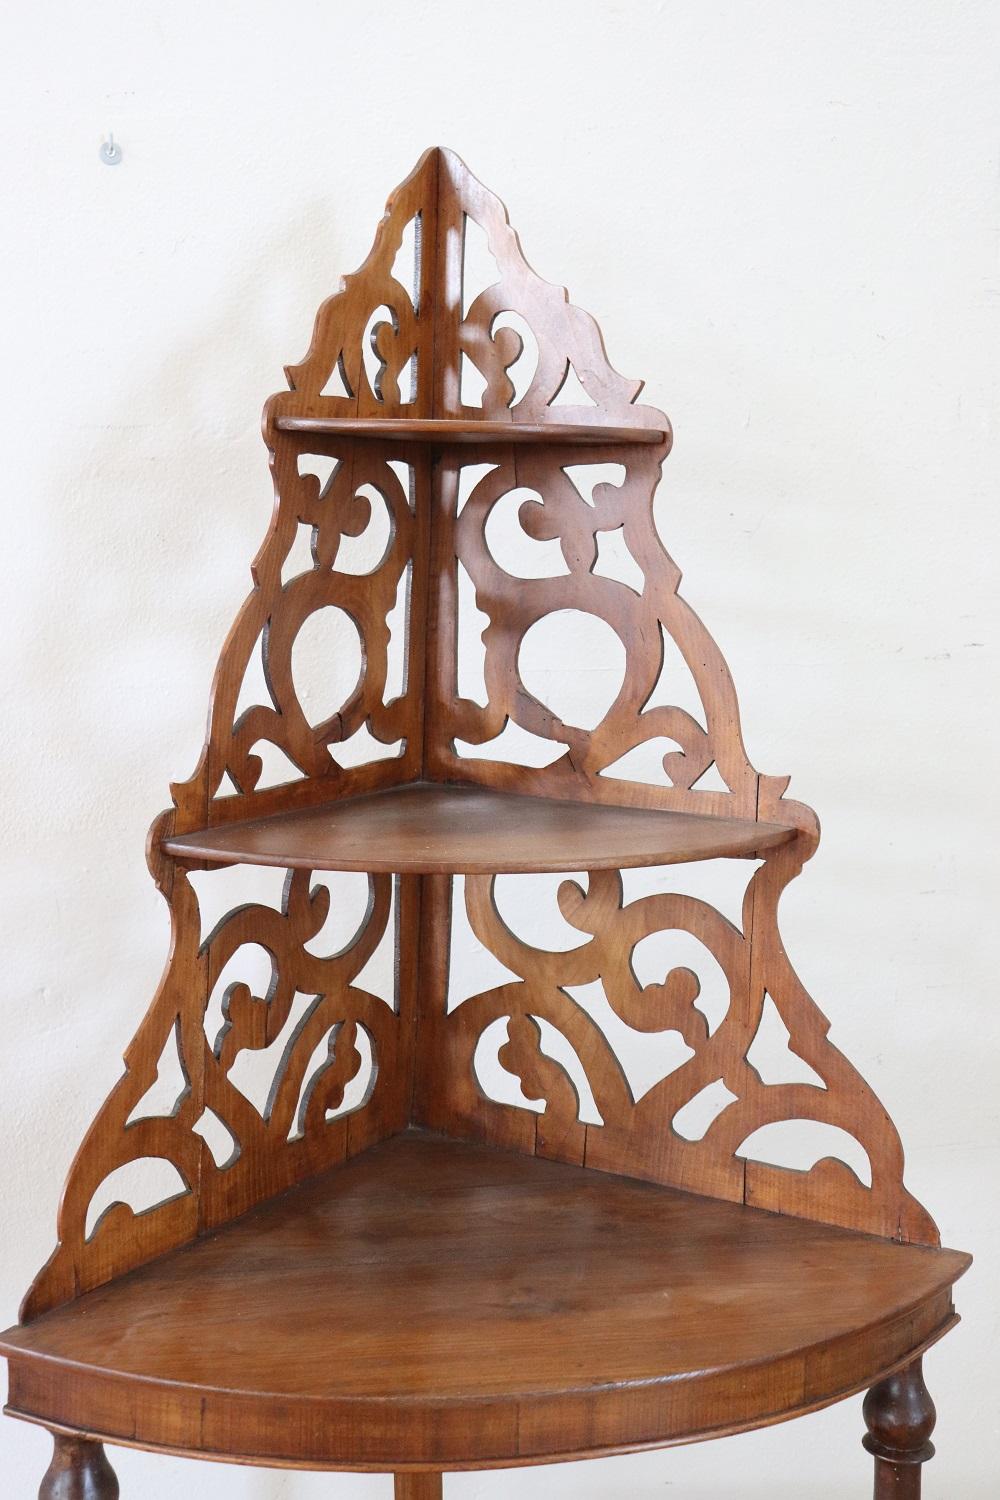 19th century Italian antique corner shelves. High quality furniture in solid walnut wood. Characterized by a refined openwork decoration at the top with curls and scrolls. On the sides, two elegant turned columns smile the tops. Equipped with three